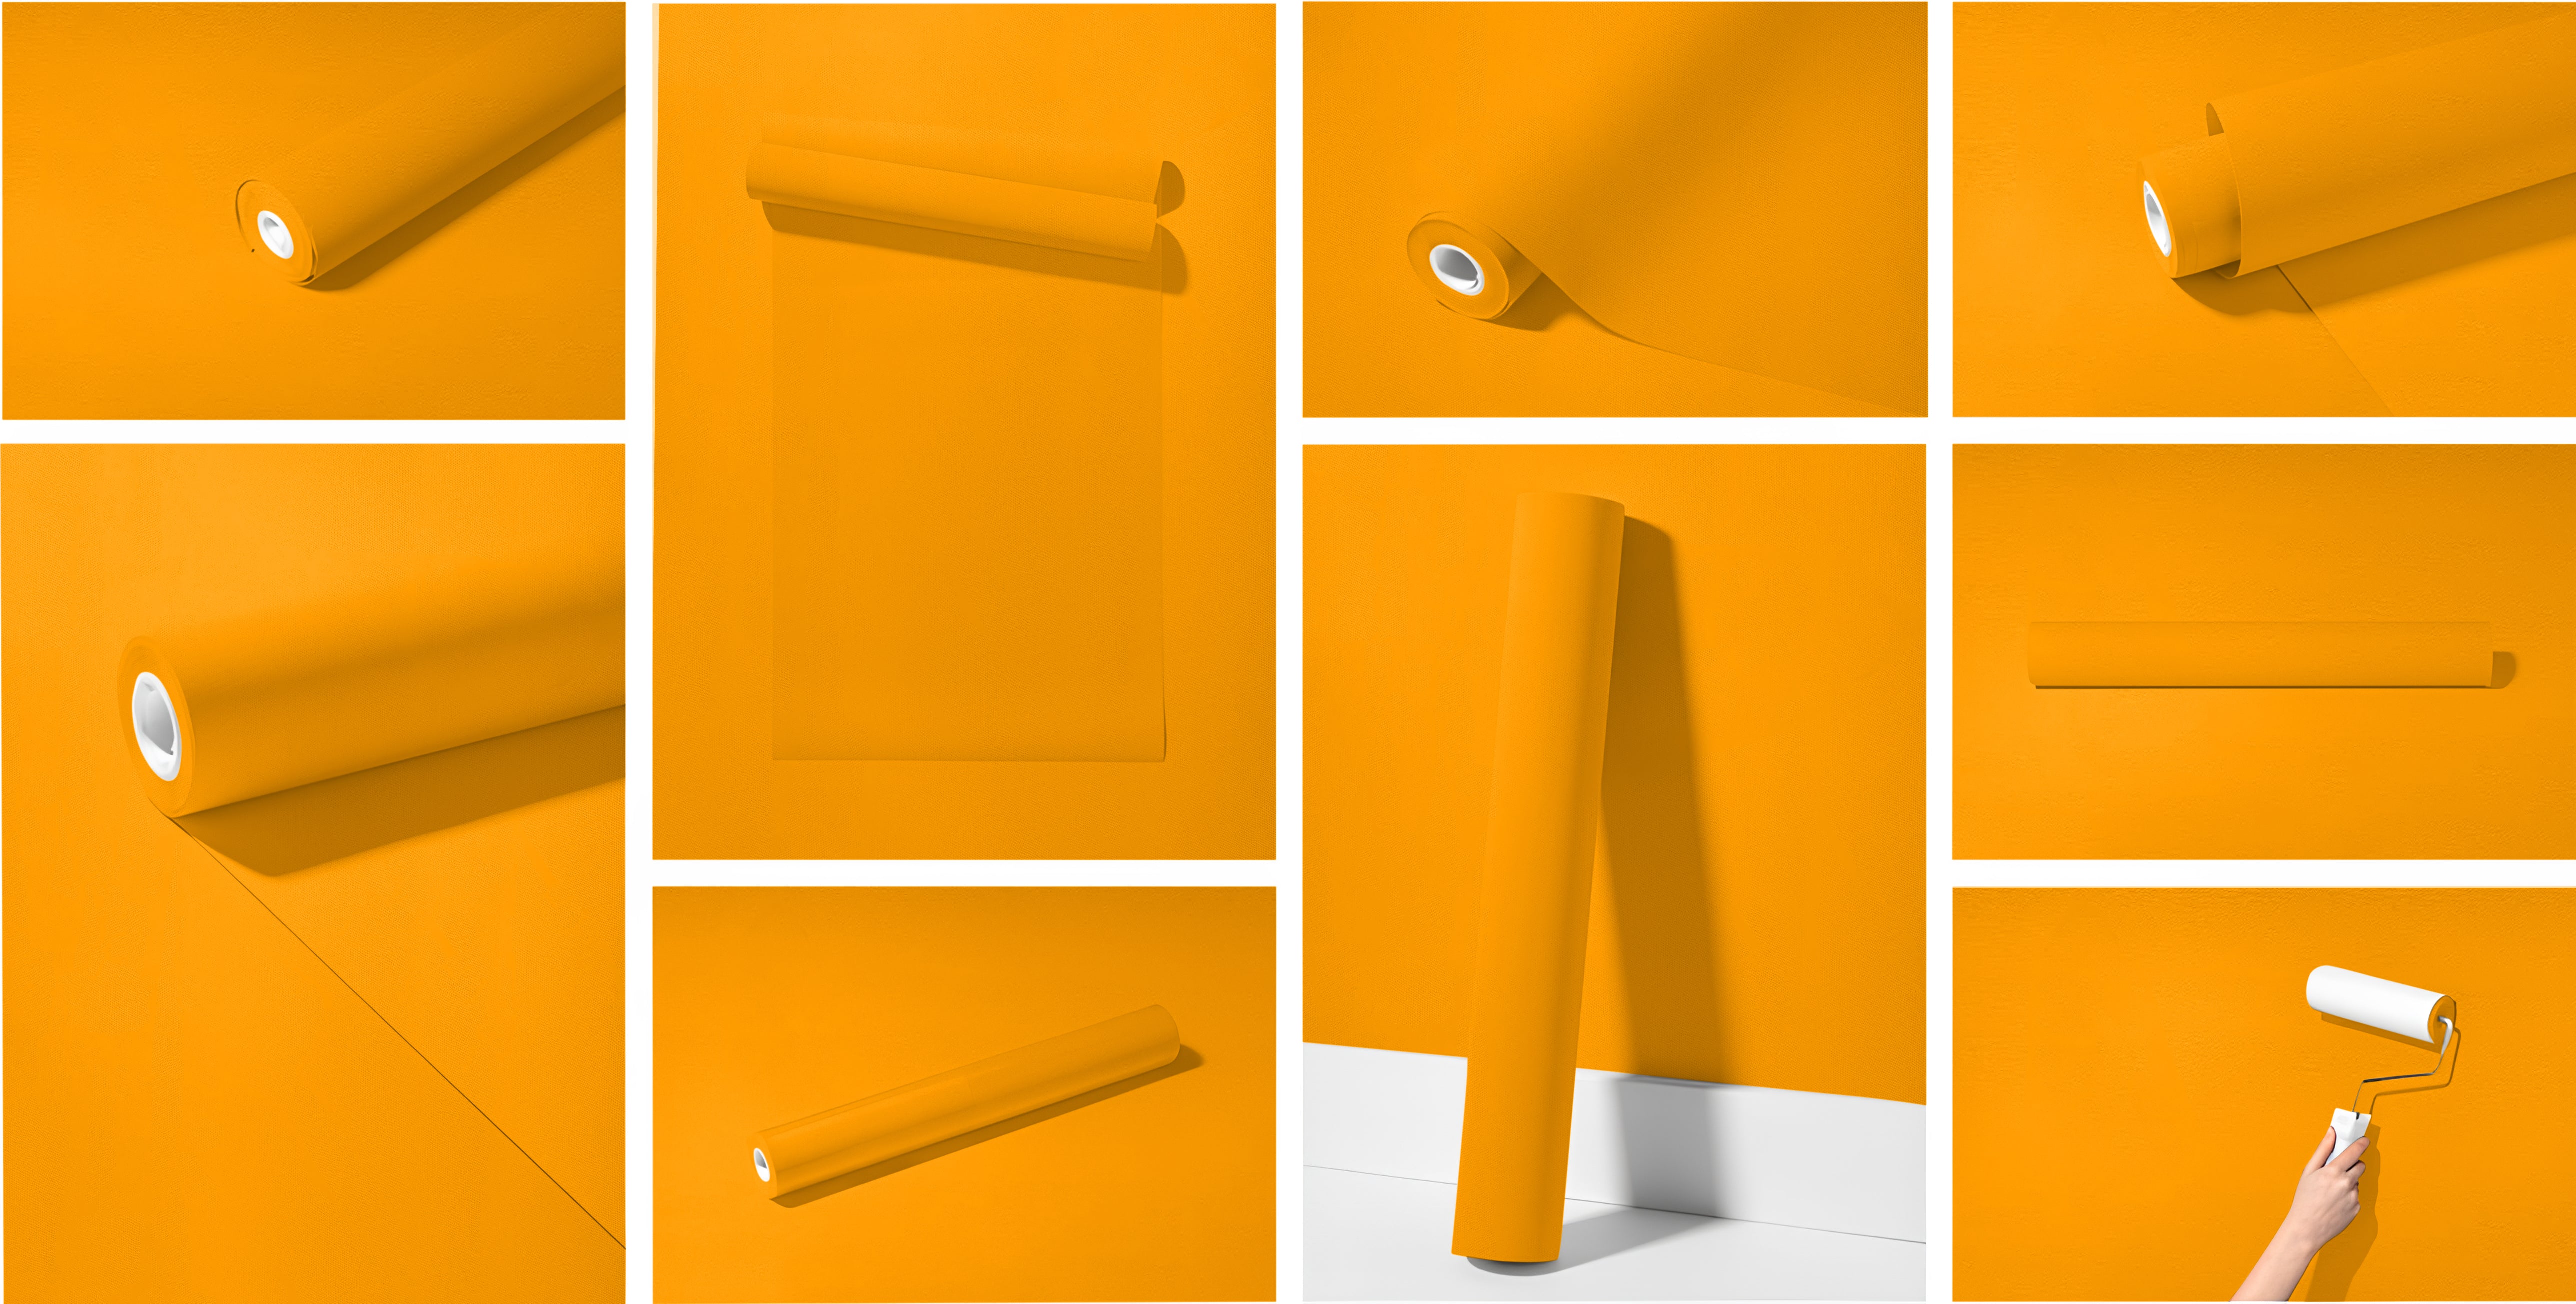 Peel & Stick Removable Re-usable Paint - Color RAL 1028 Melon Yellow - offRAL™ - RALRAW LLC, USA